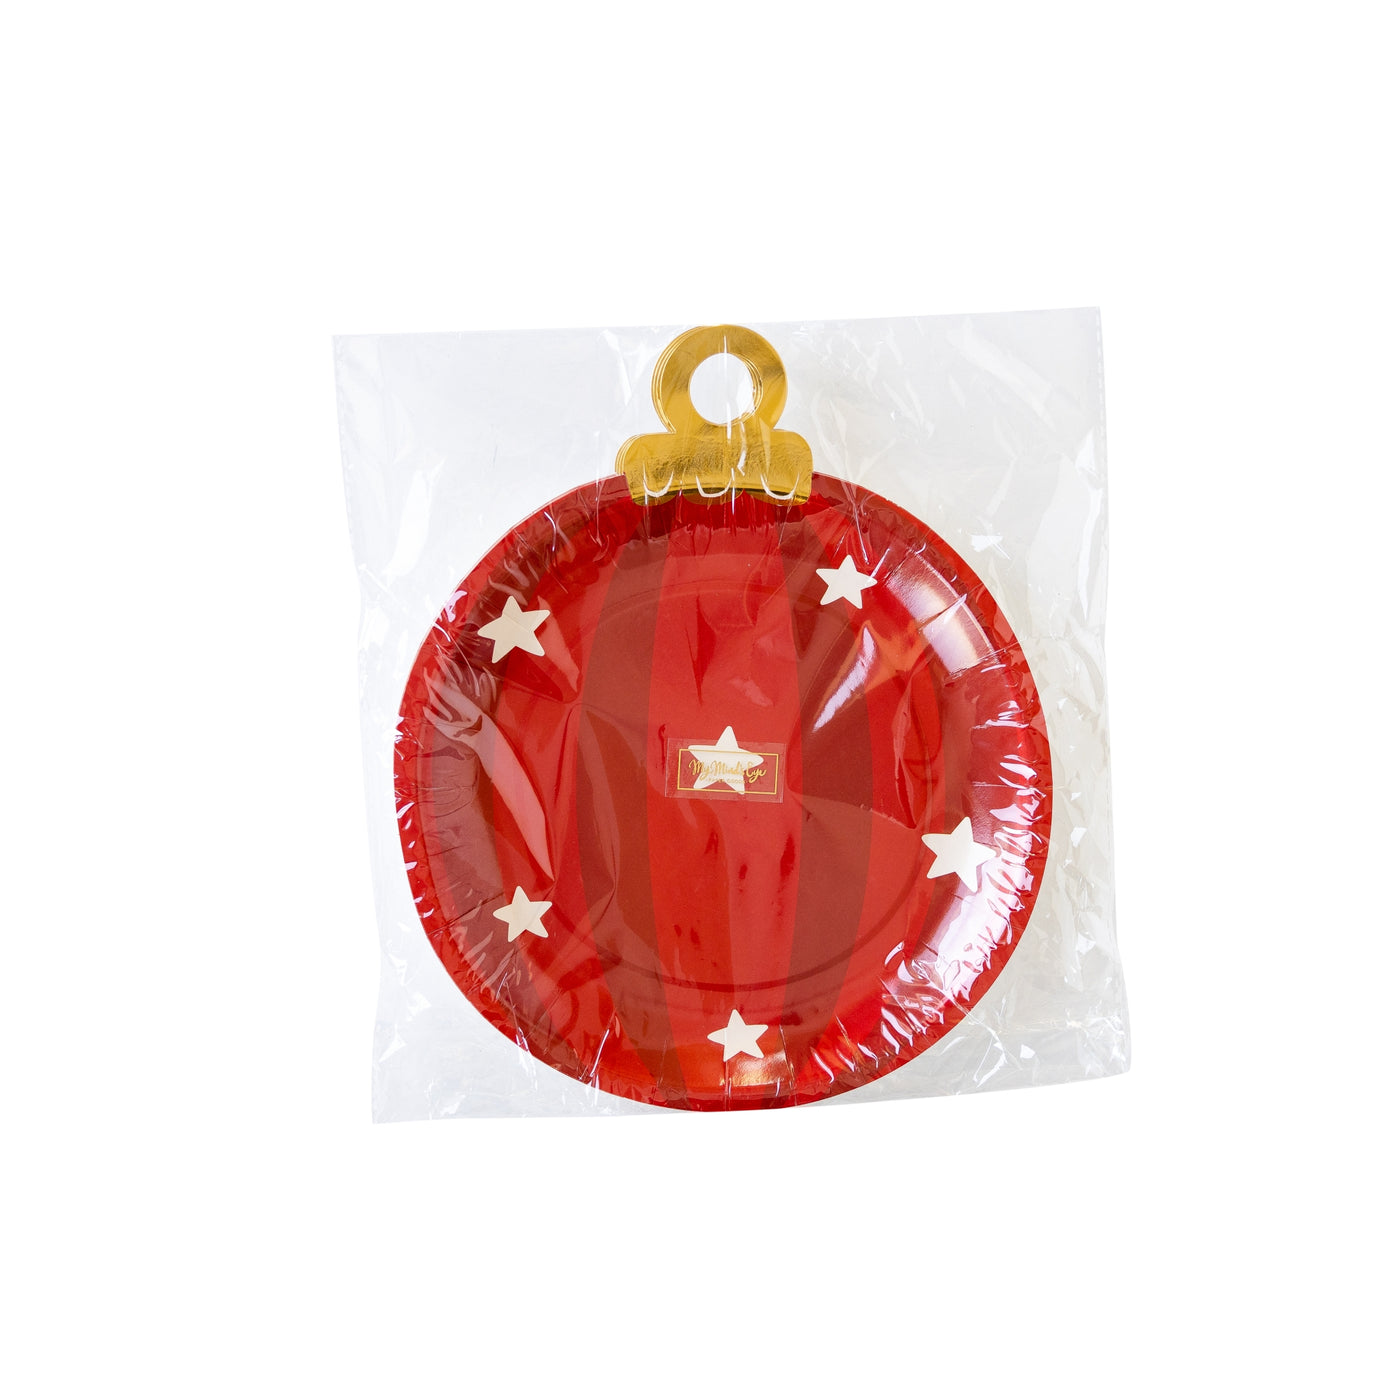 BEC1042 - Believe Ornament Shaped Paper Plate